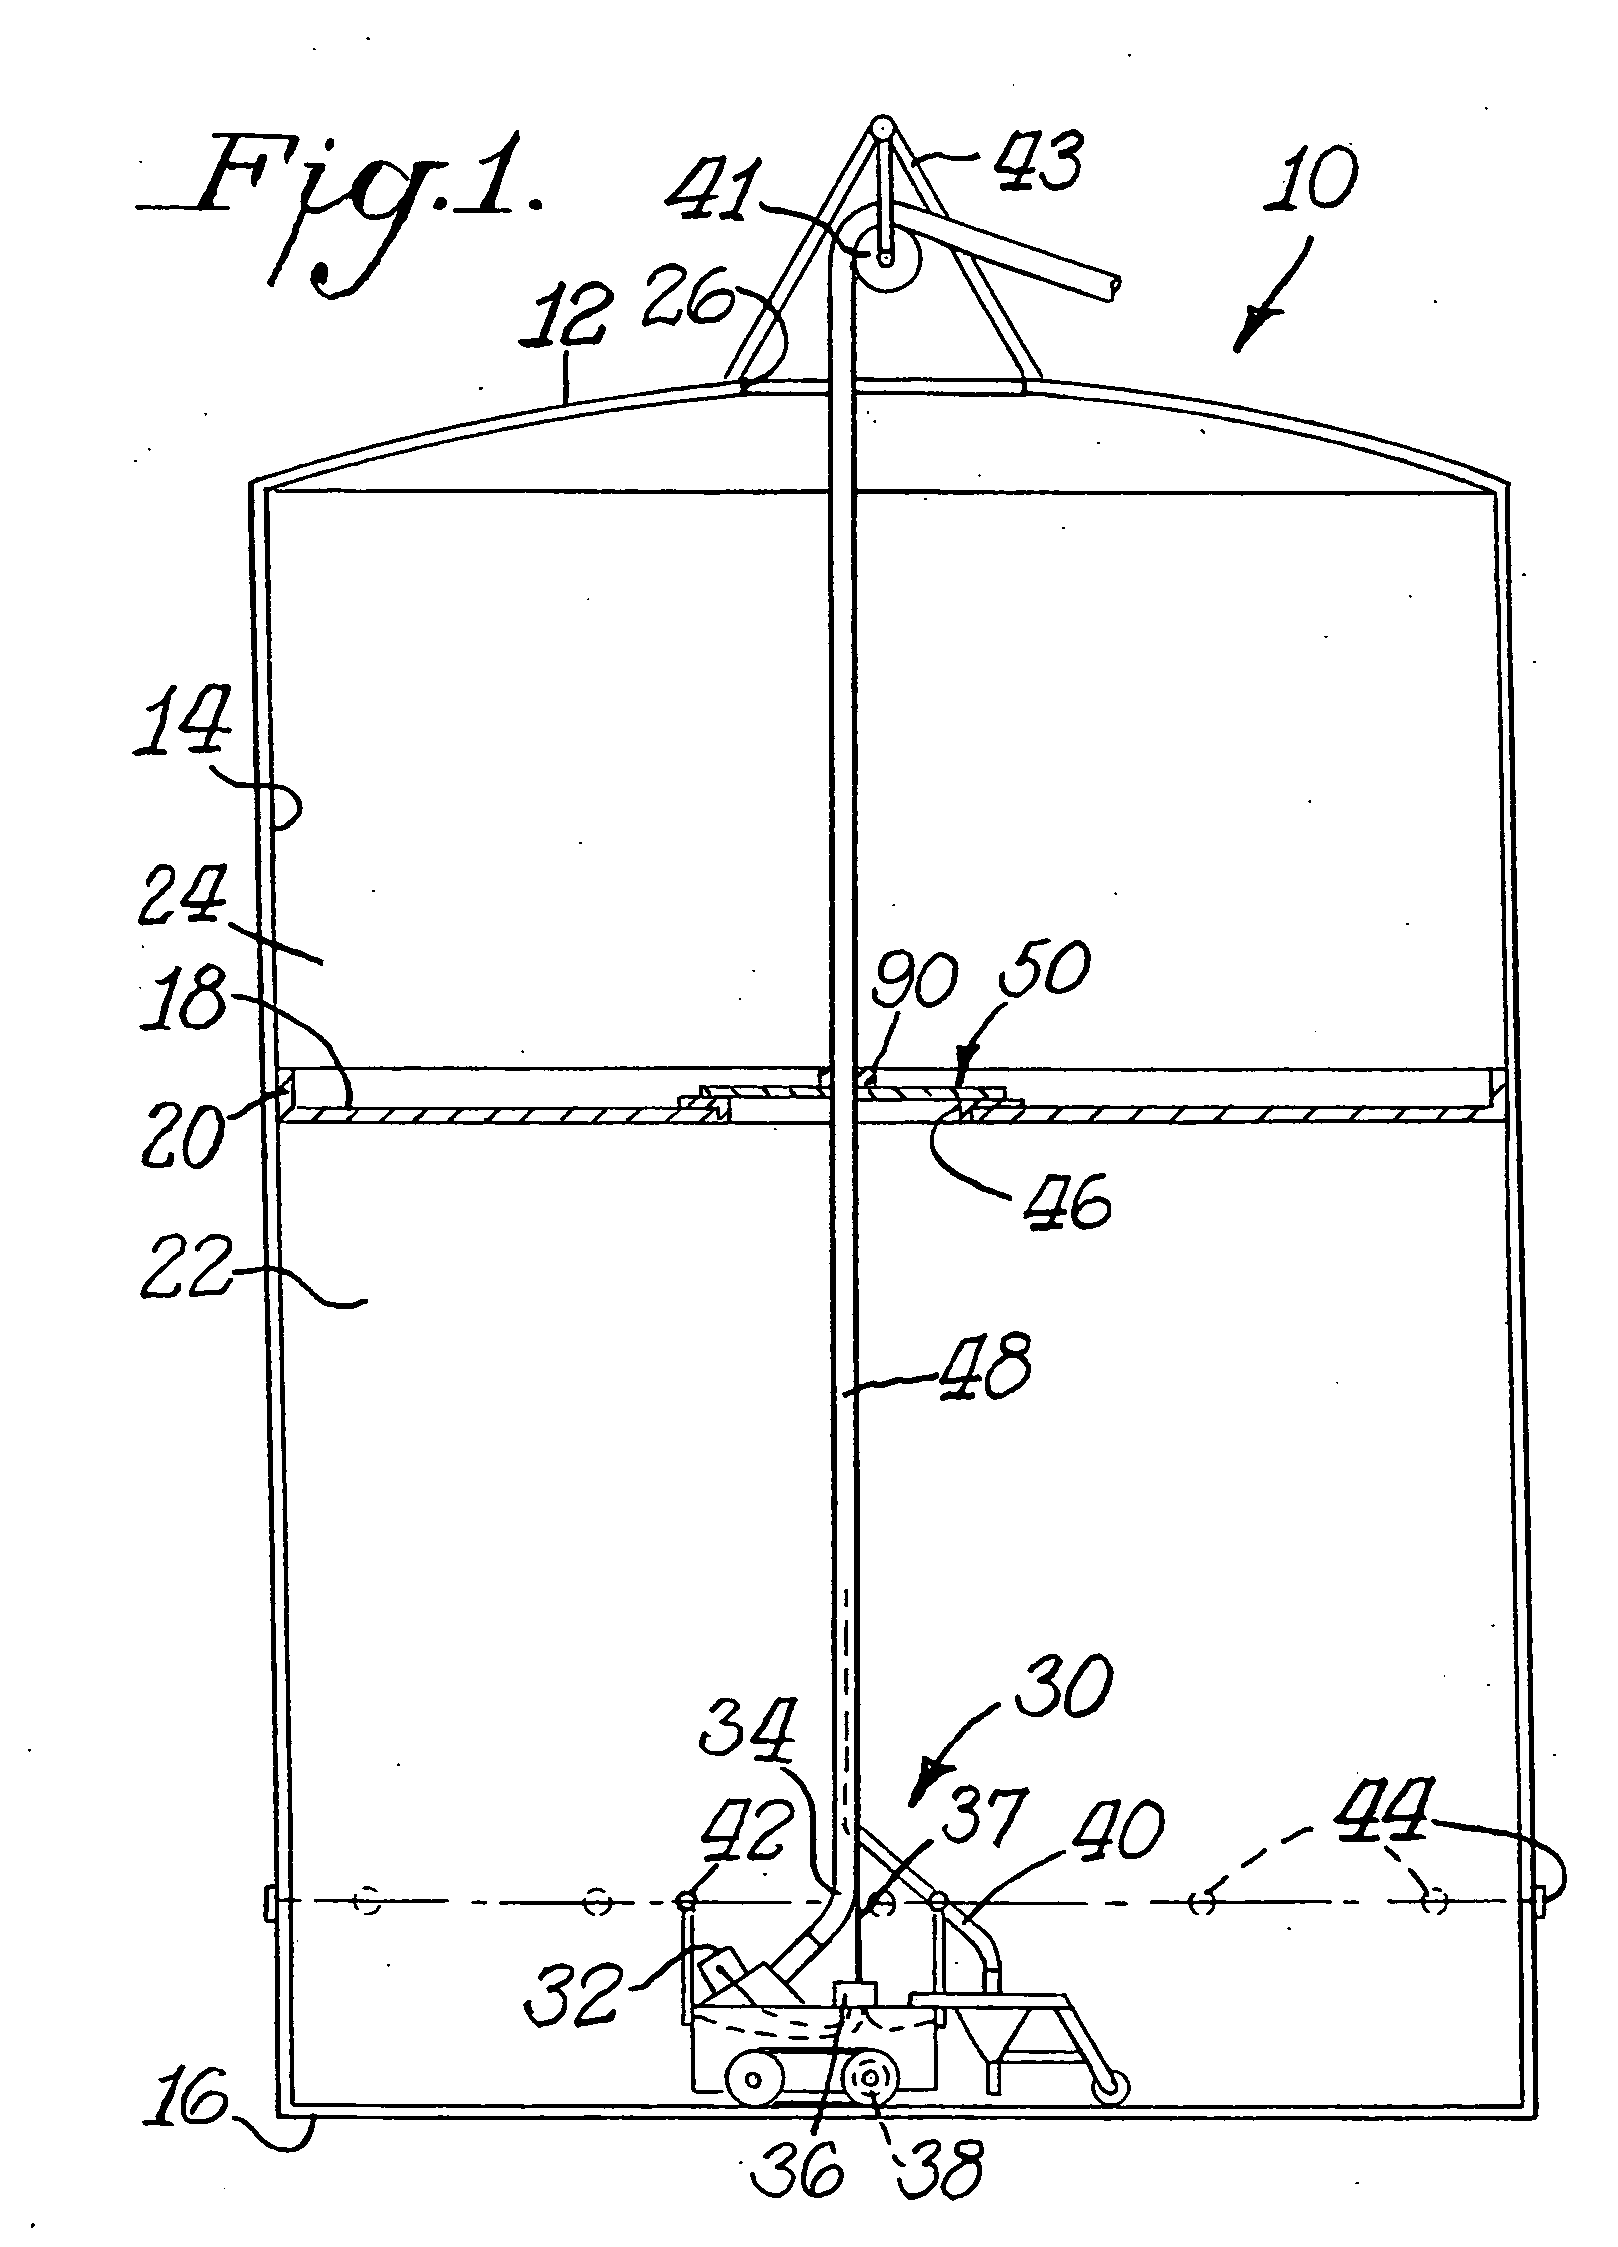 Hydraulic and electric umbilical connection for an inspection vehicle for inspecting a liquid-filled tank